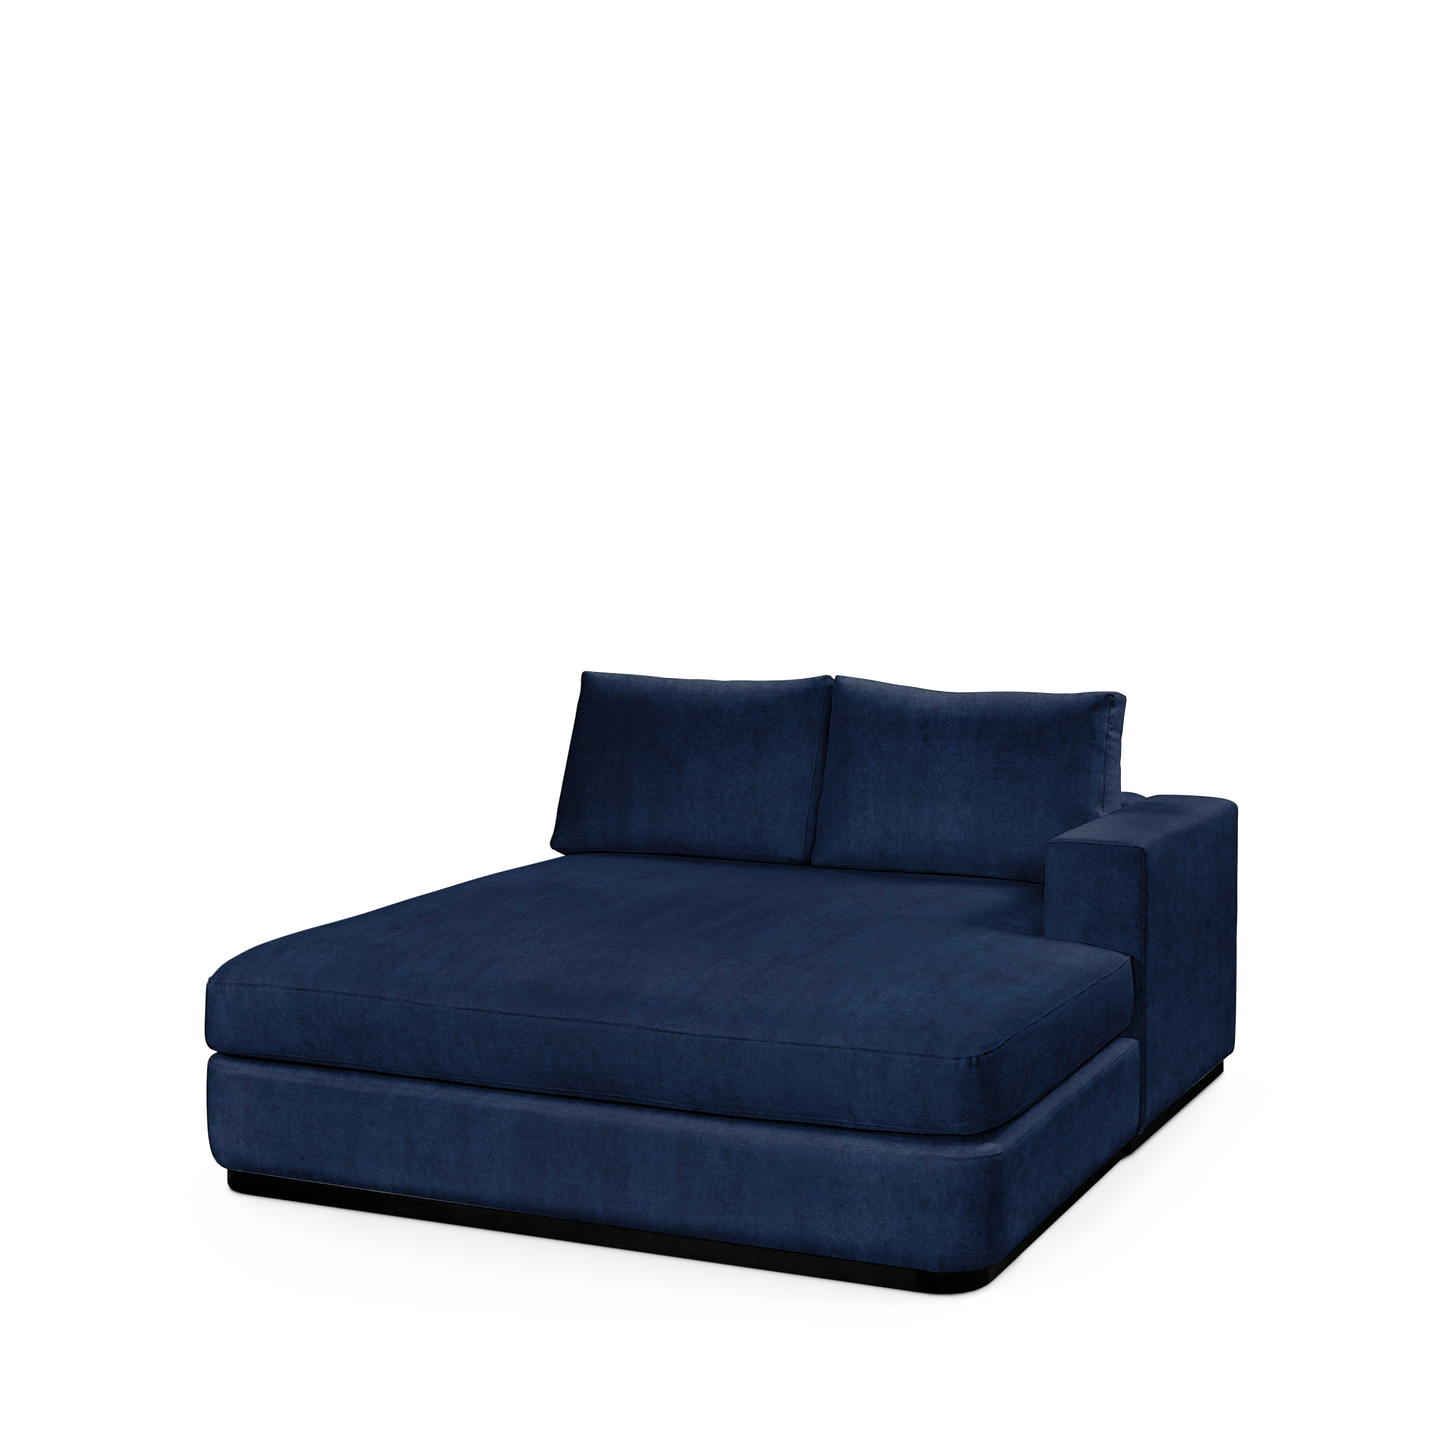 ATLAS 160 Lounge Bed arm rest right with London dark blue textile 